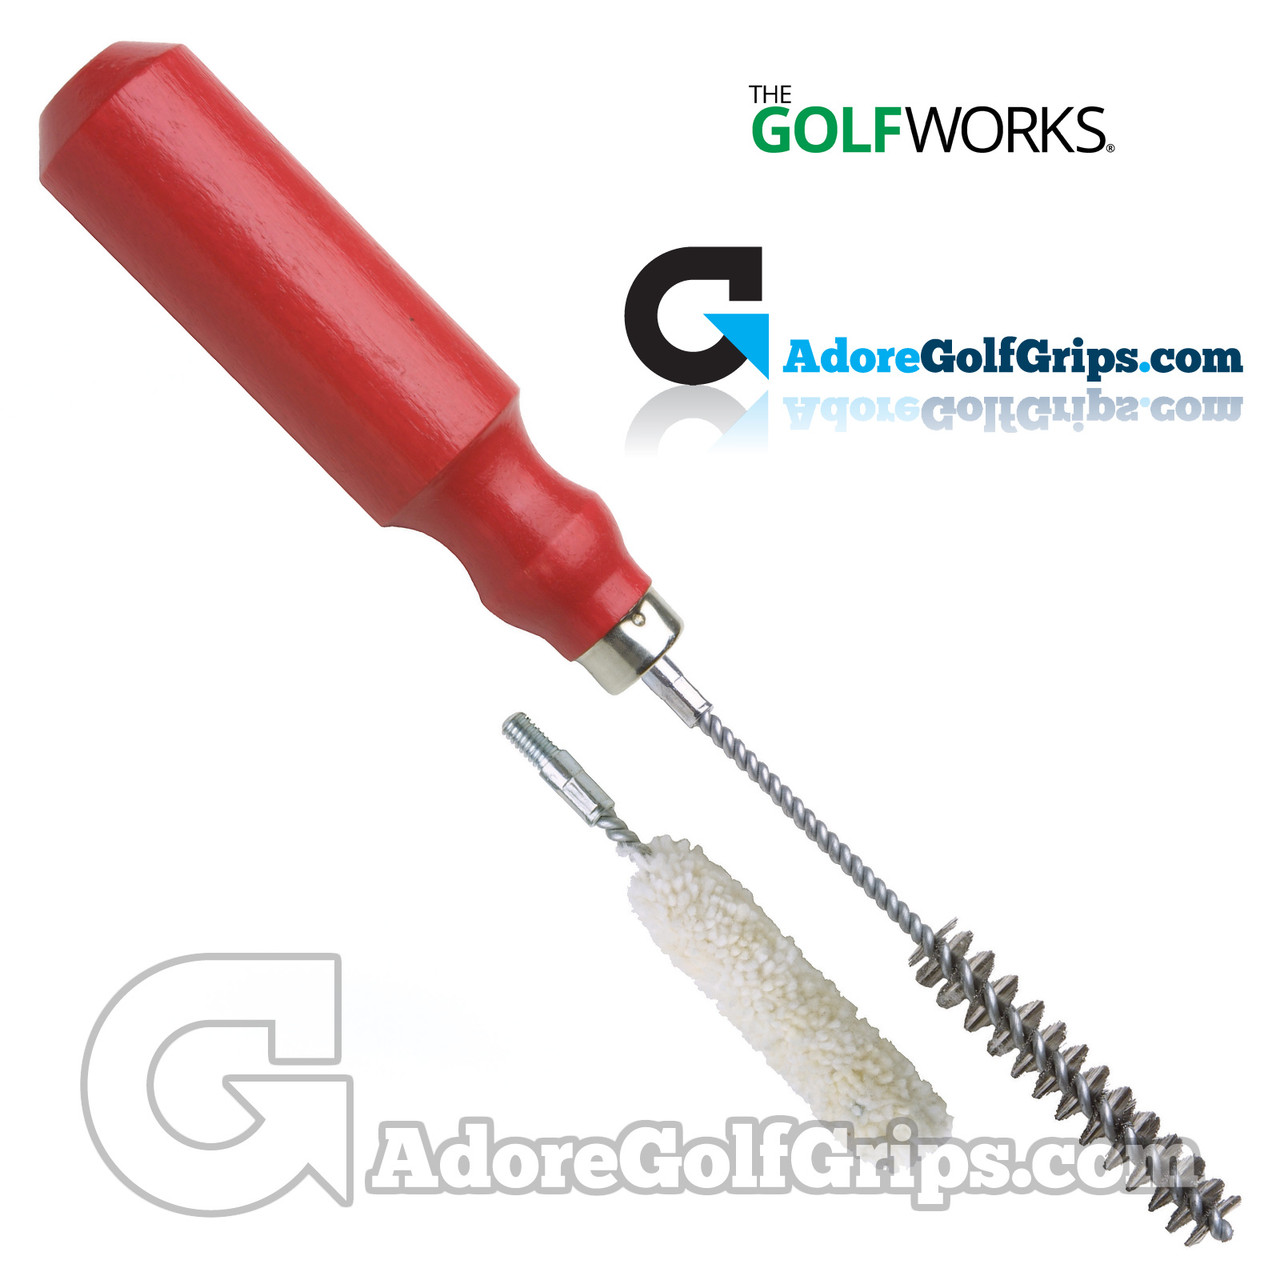 Here's a Quick Way to Polish Golf Clubs Easily with a Drill! – LINE10 Tools